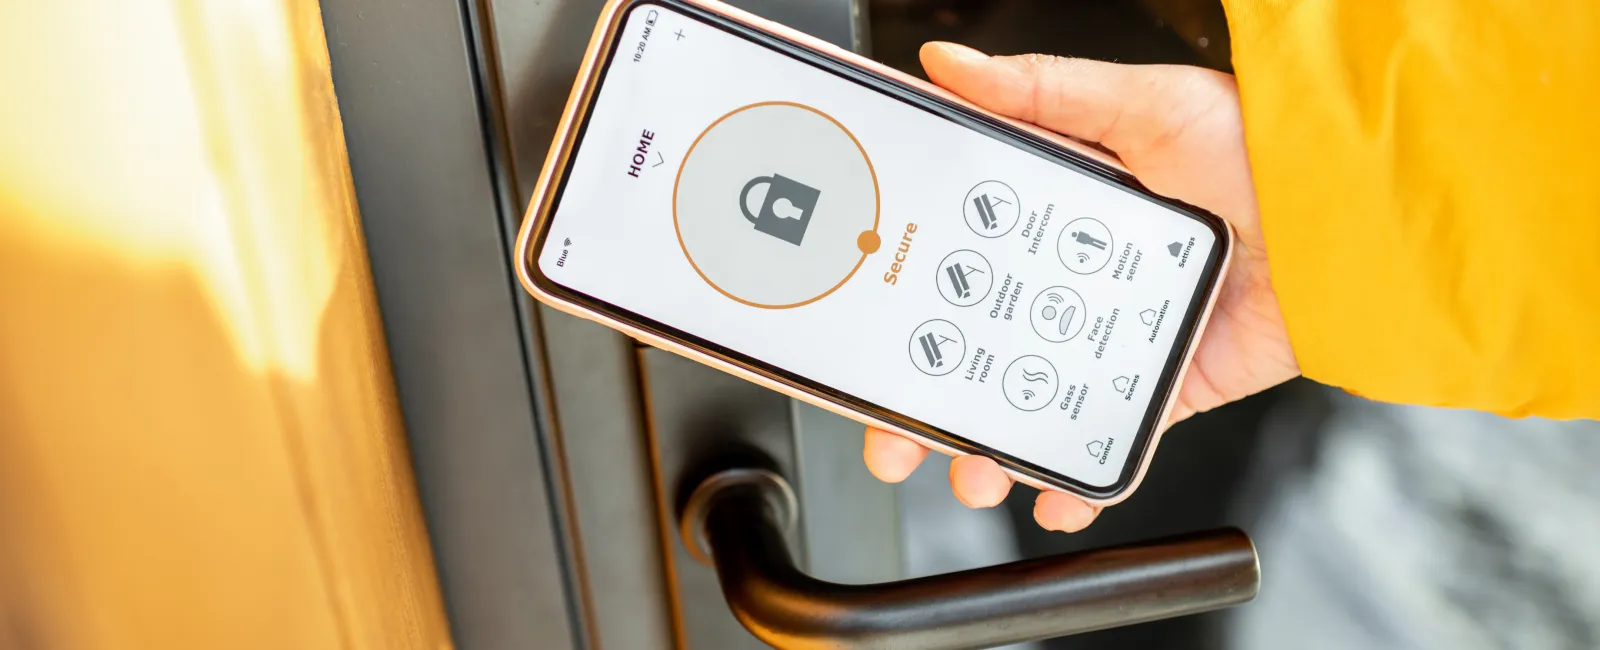 2021 Home Security Devices To Invest In